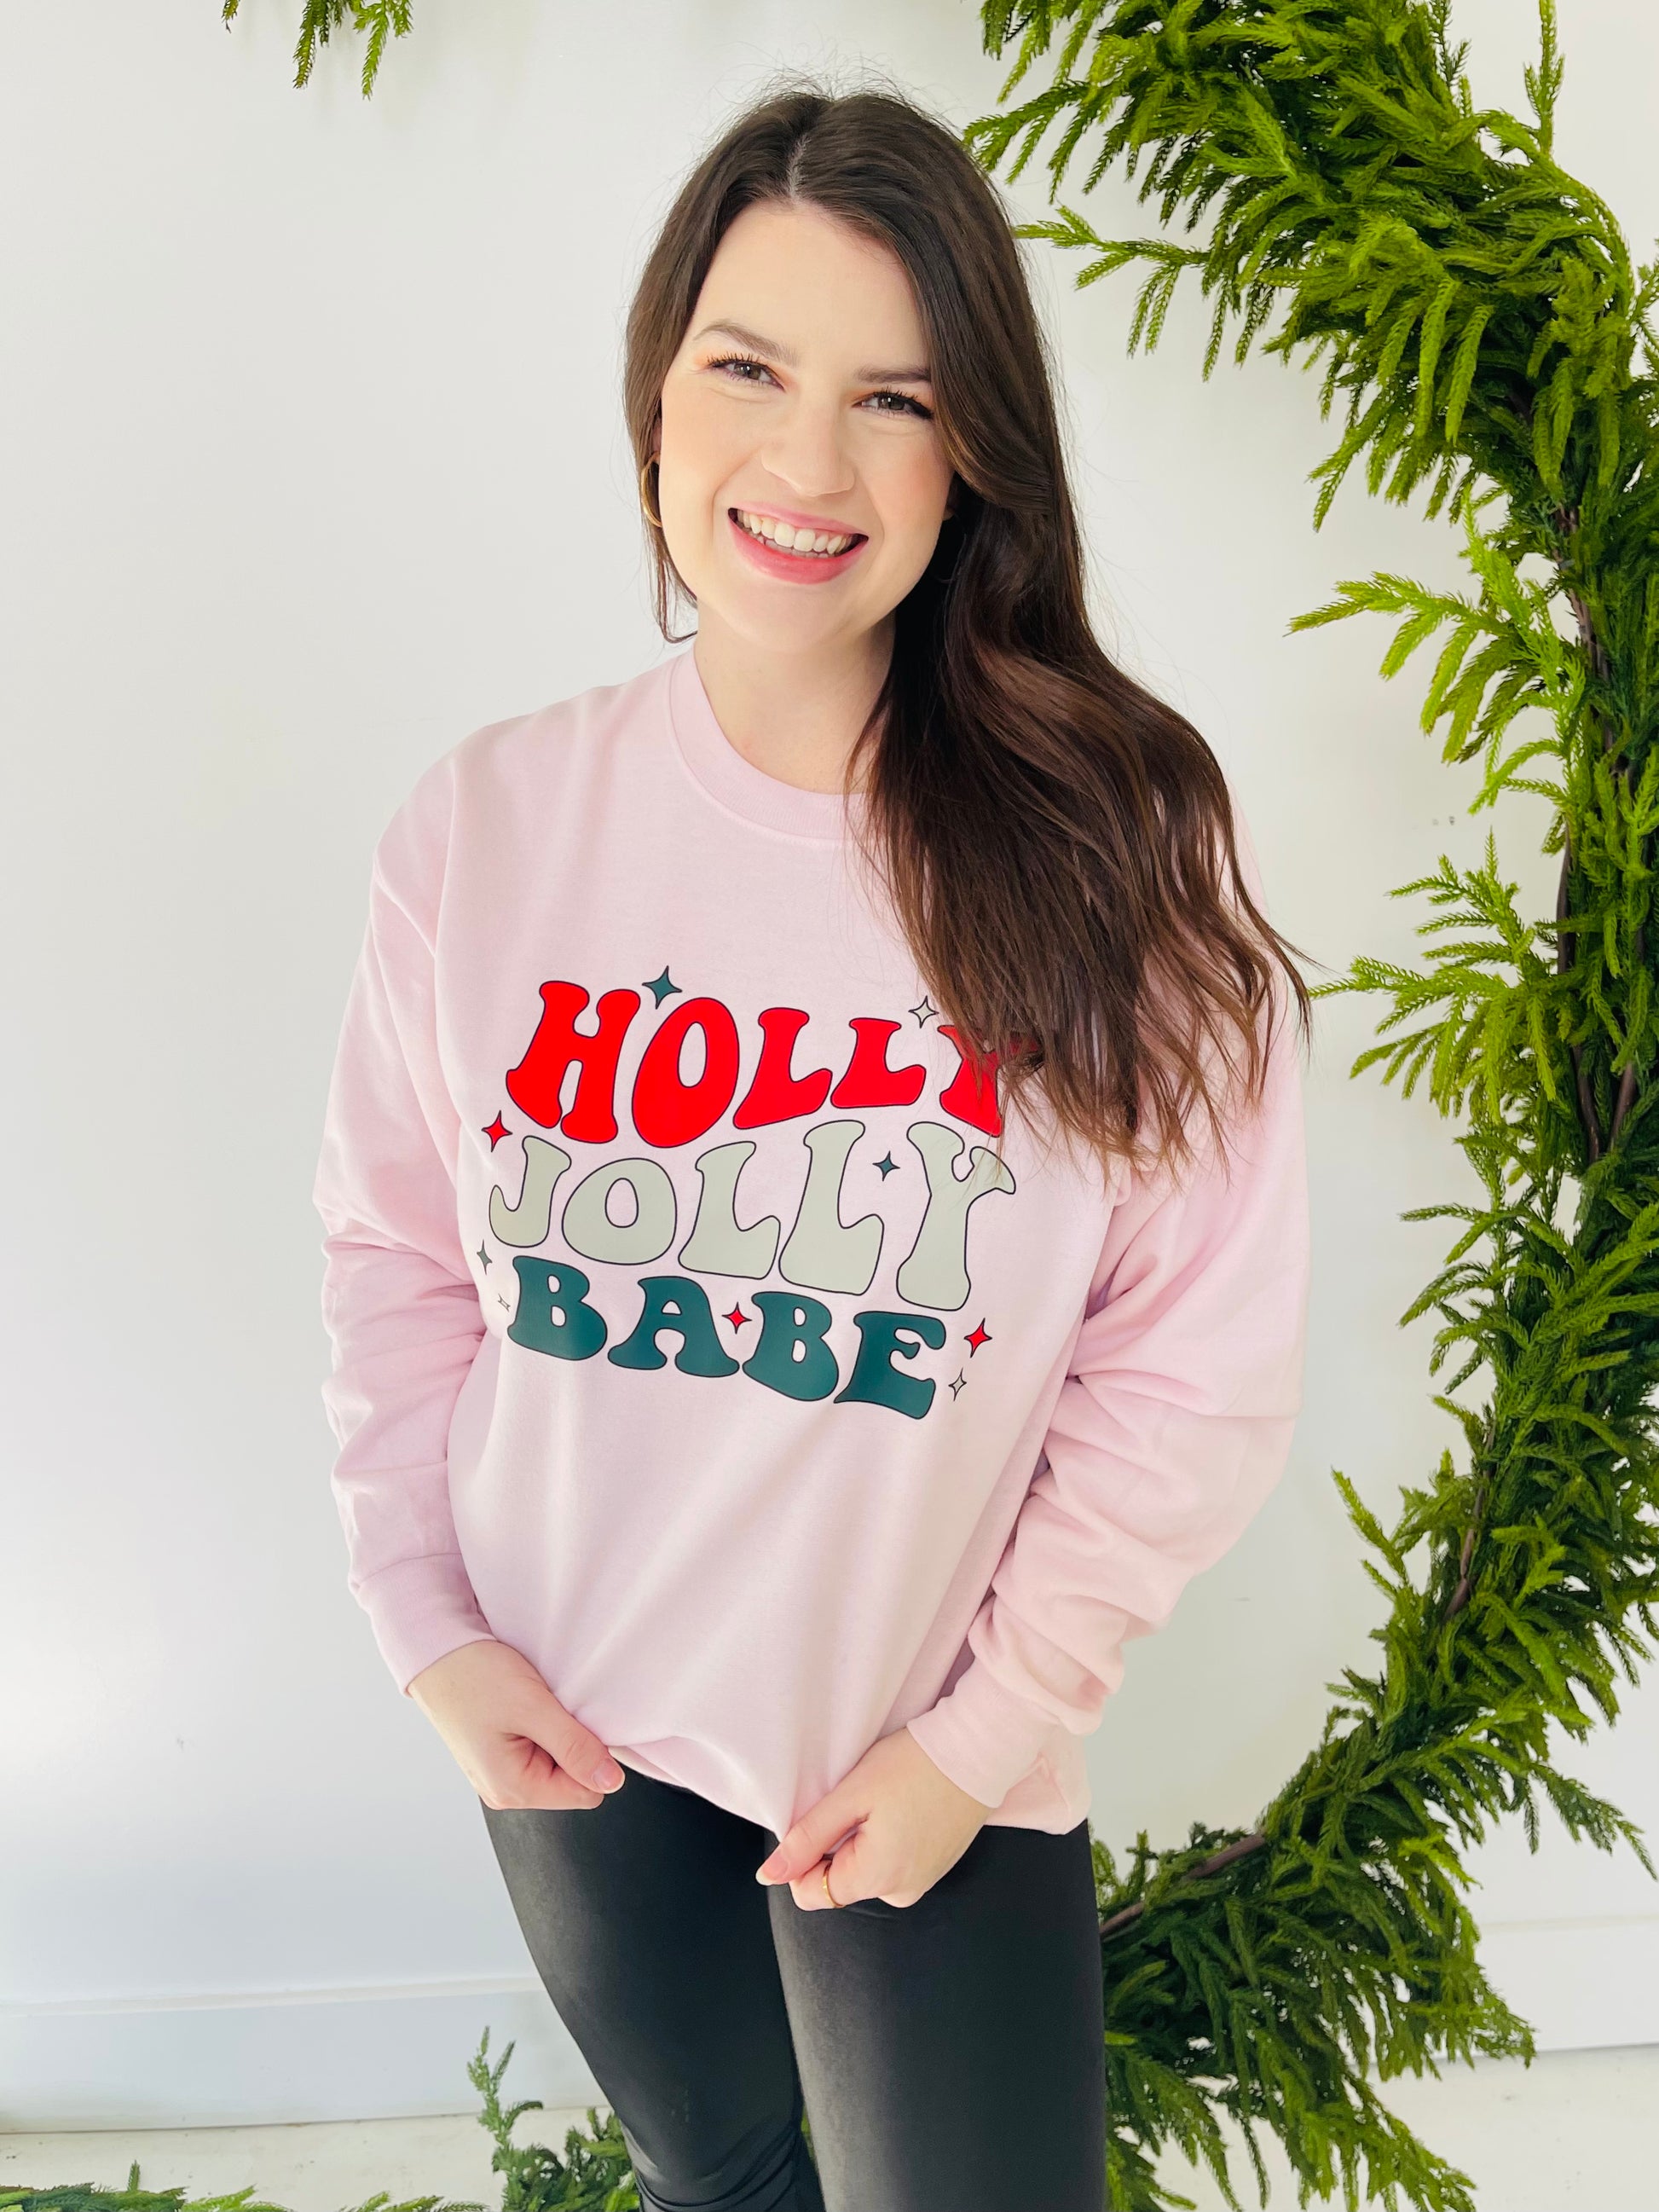 Are you a holly jolly babe this time of year? This sweatshirt is calling your name if so! This fun crewneck sweatshirt is a soft, light pink color with a vibrant retro looking graphic. 